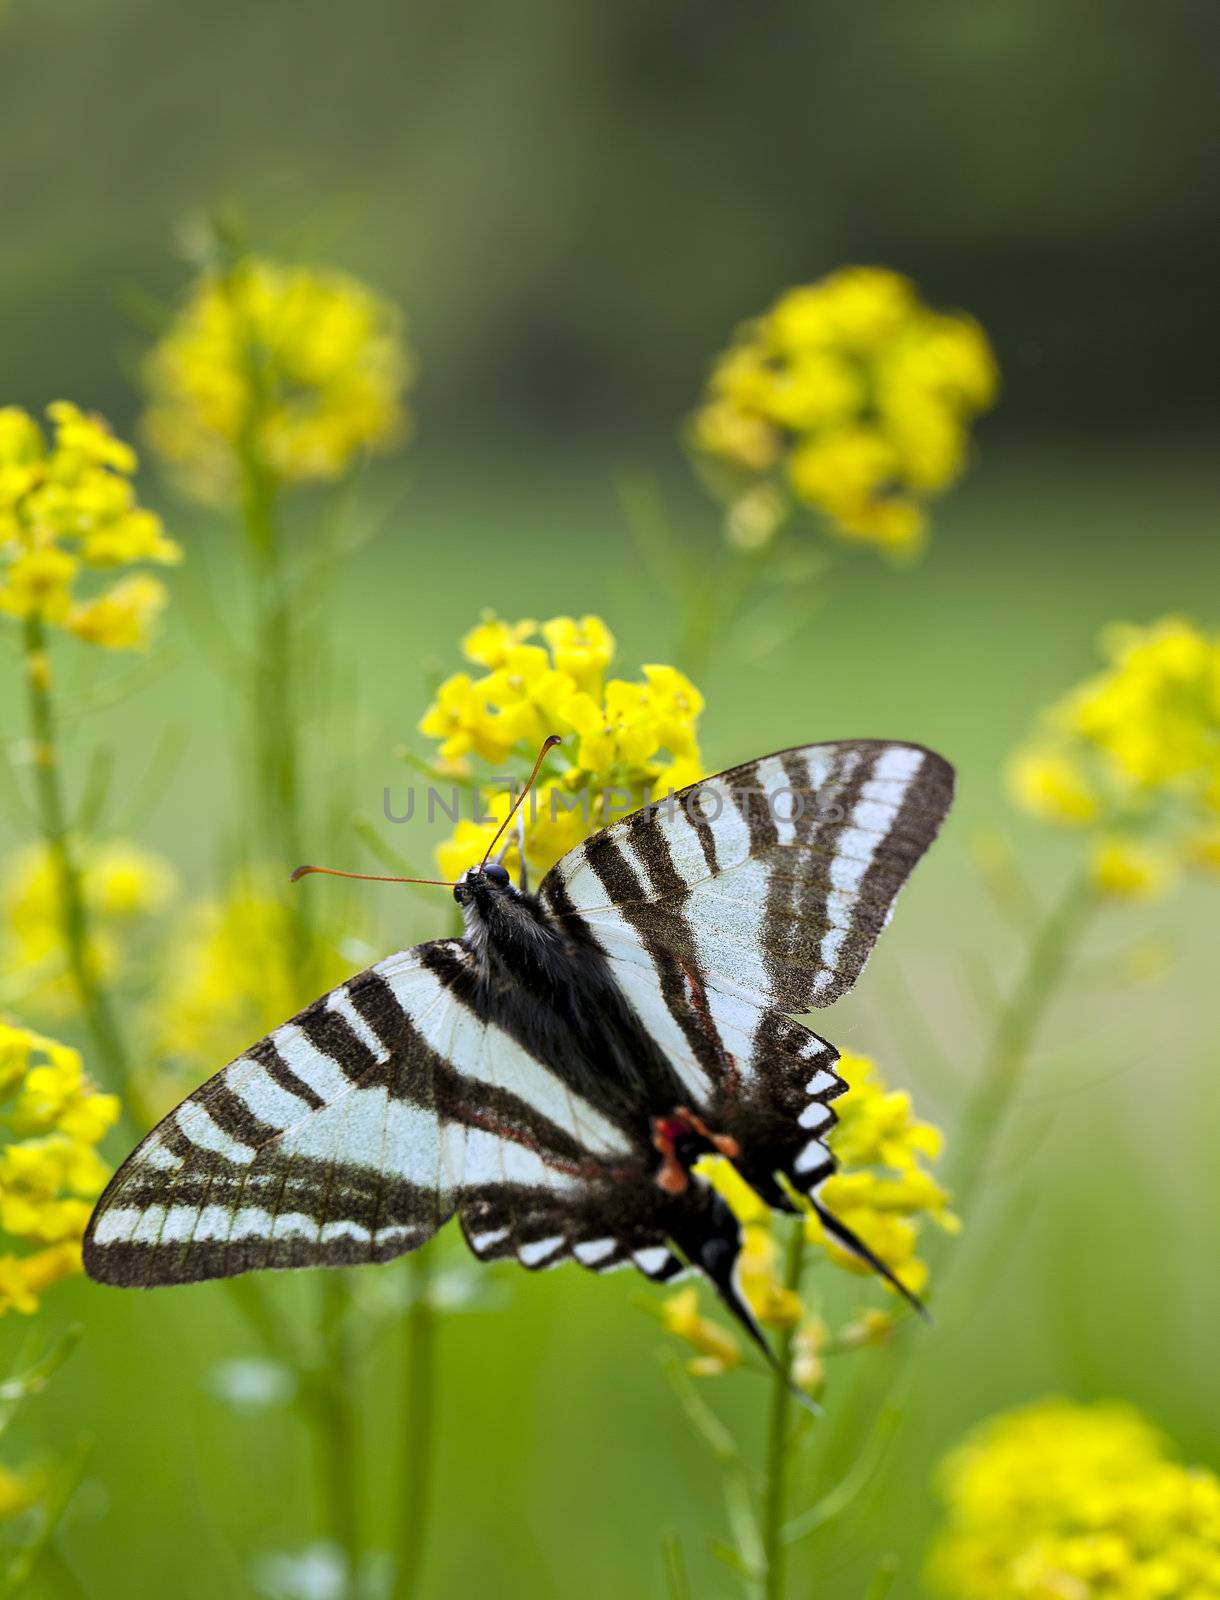 A close up shot of a Zebra Swallowtail Butterfly (Protographium marcellus) on some yellow flowers.